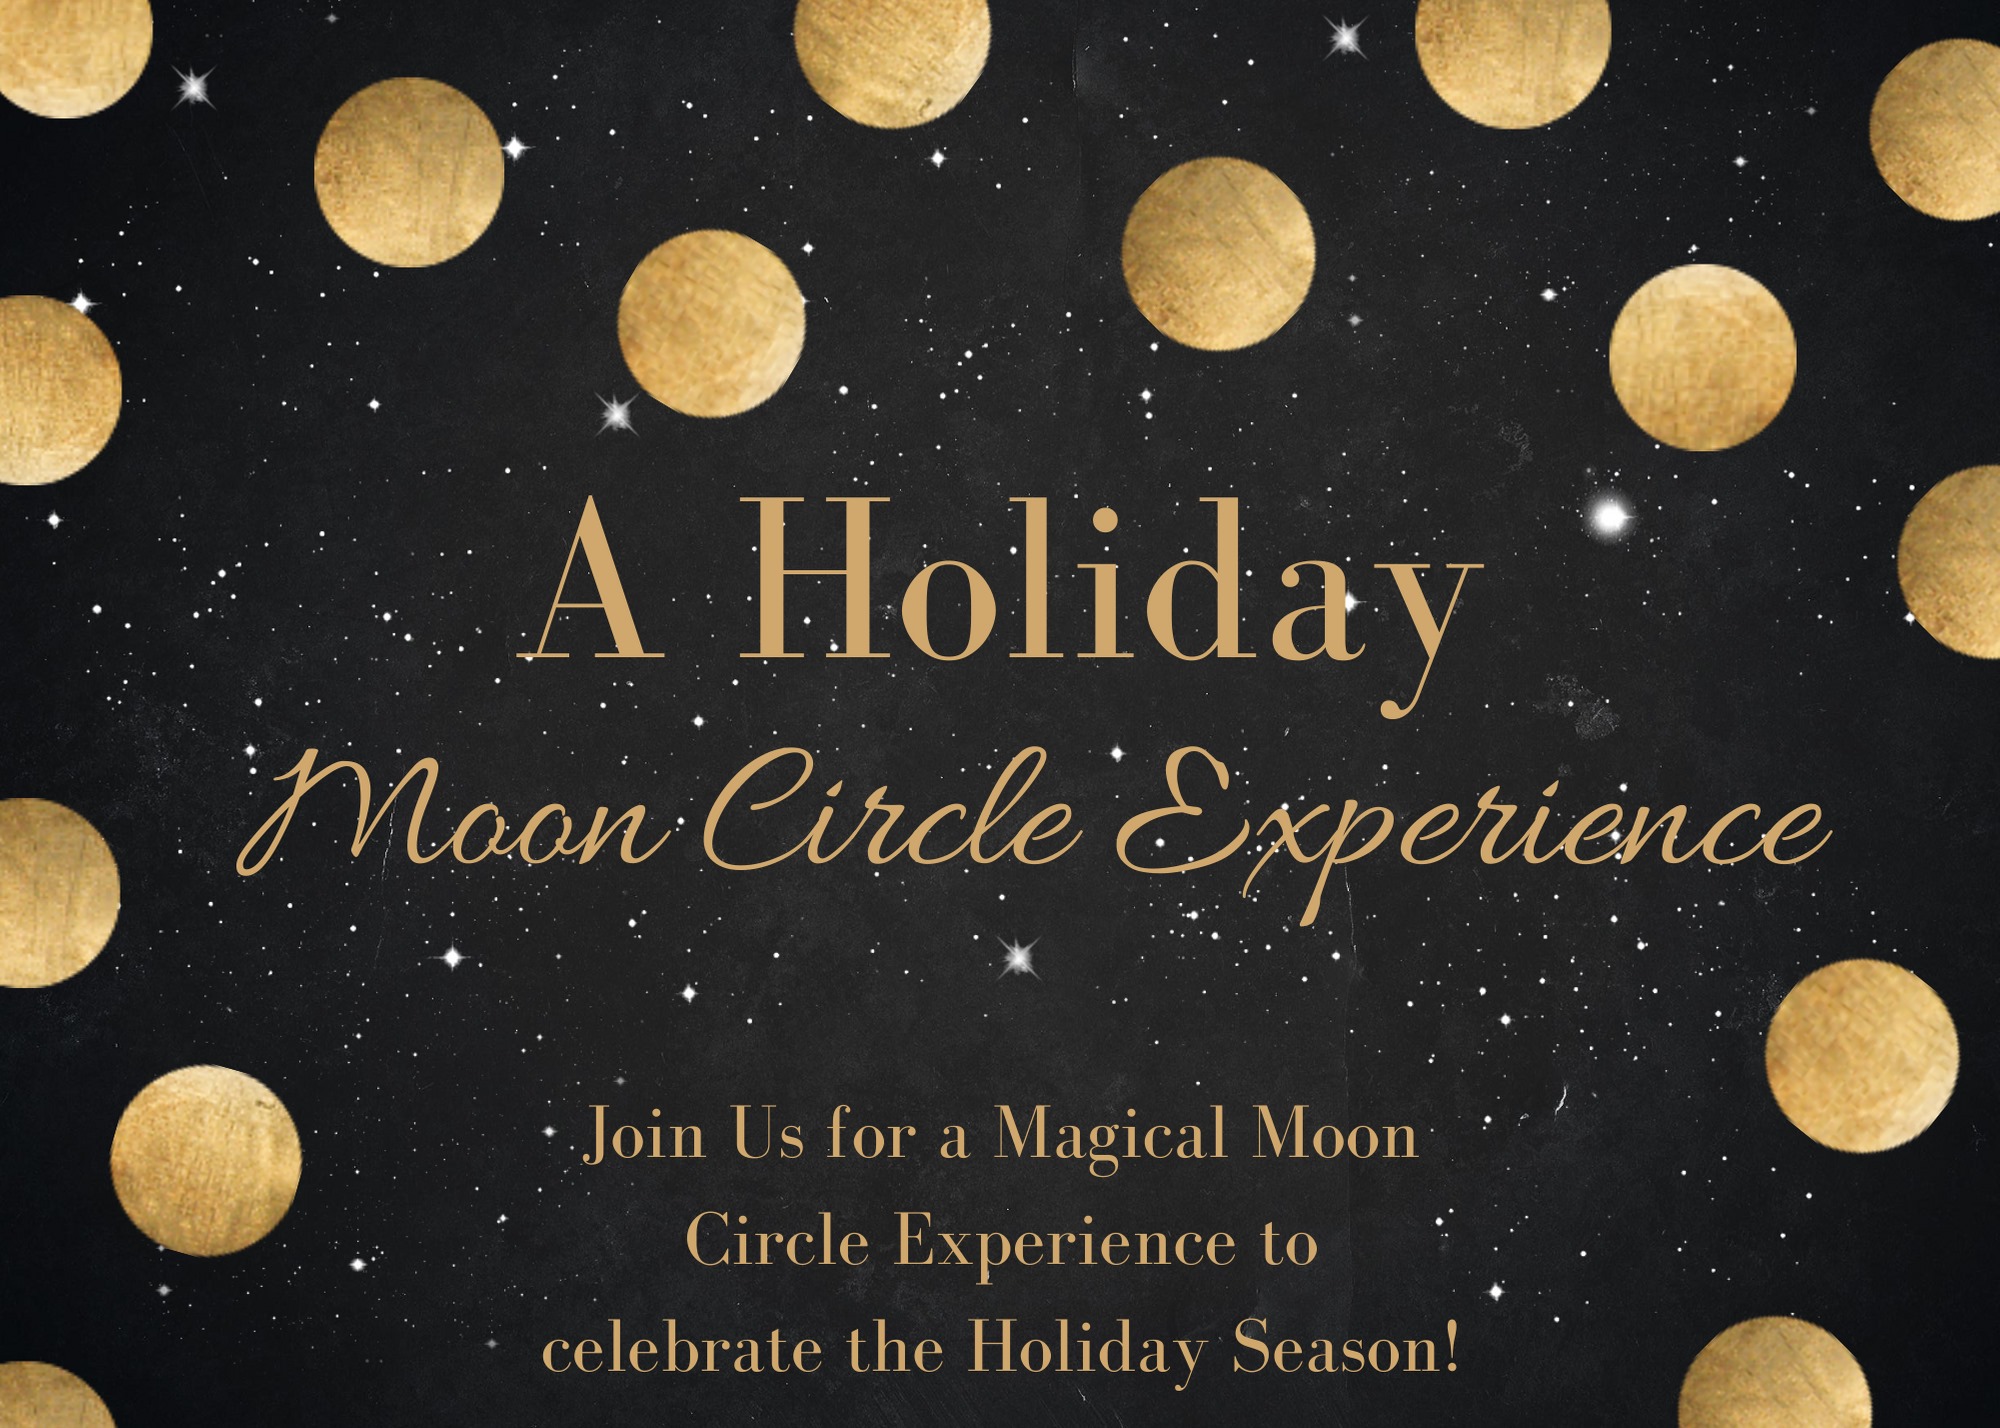 A Holiday Moon Circle Experience Full Moon Women's Circle Event